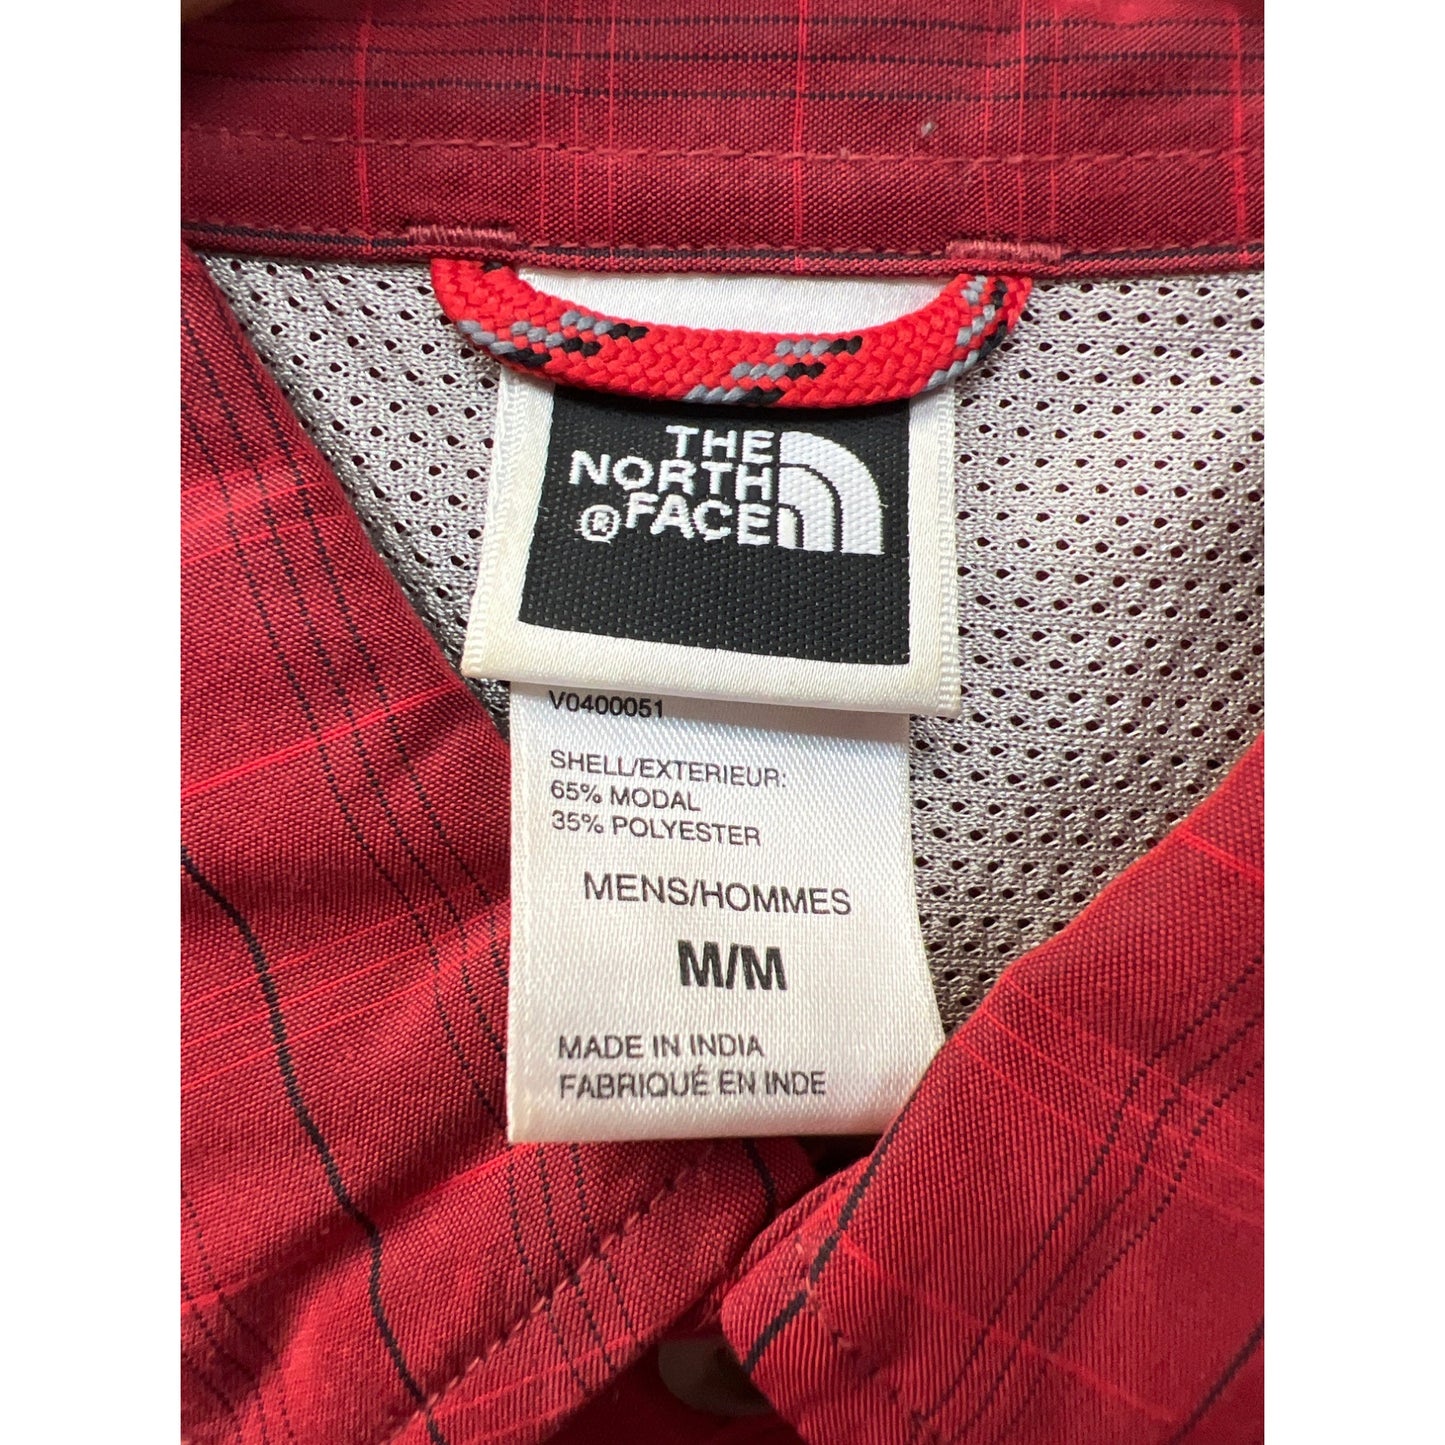 The North Face Red Plaid Long Sleeve Button Down Outdoor Shirt